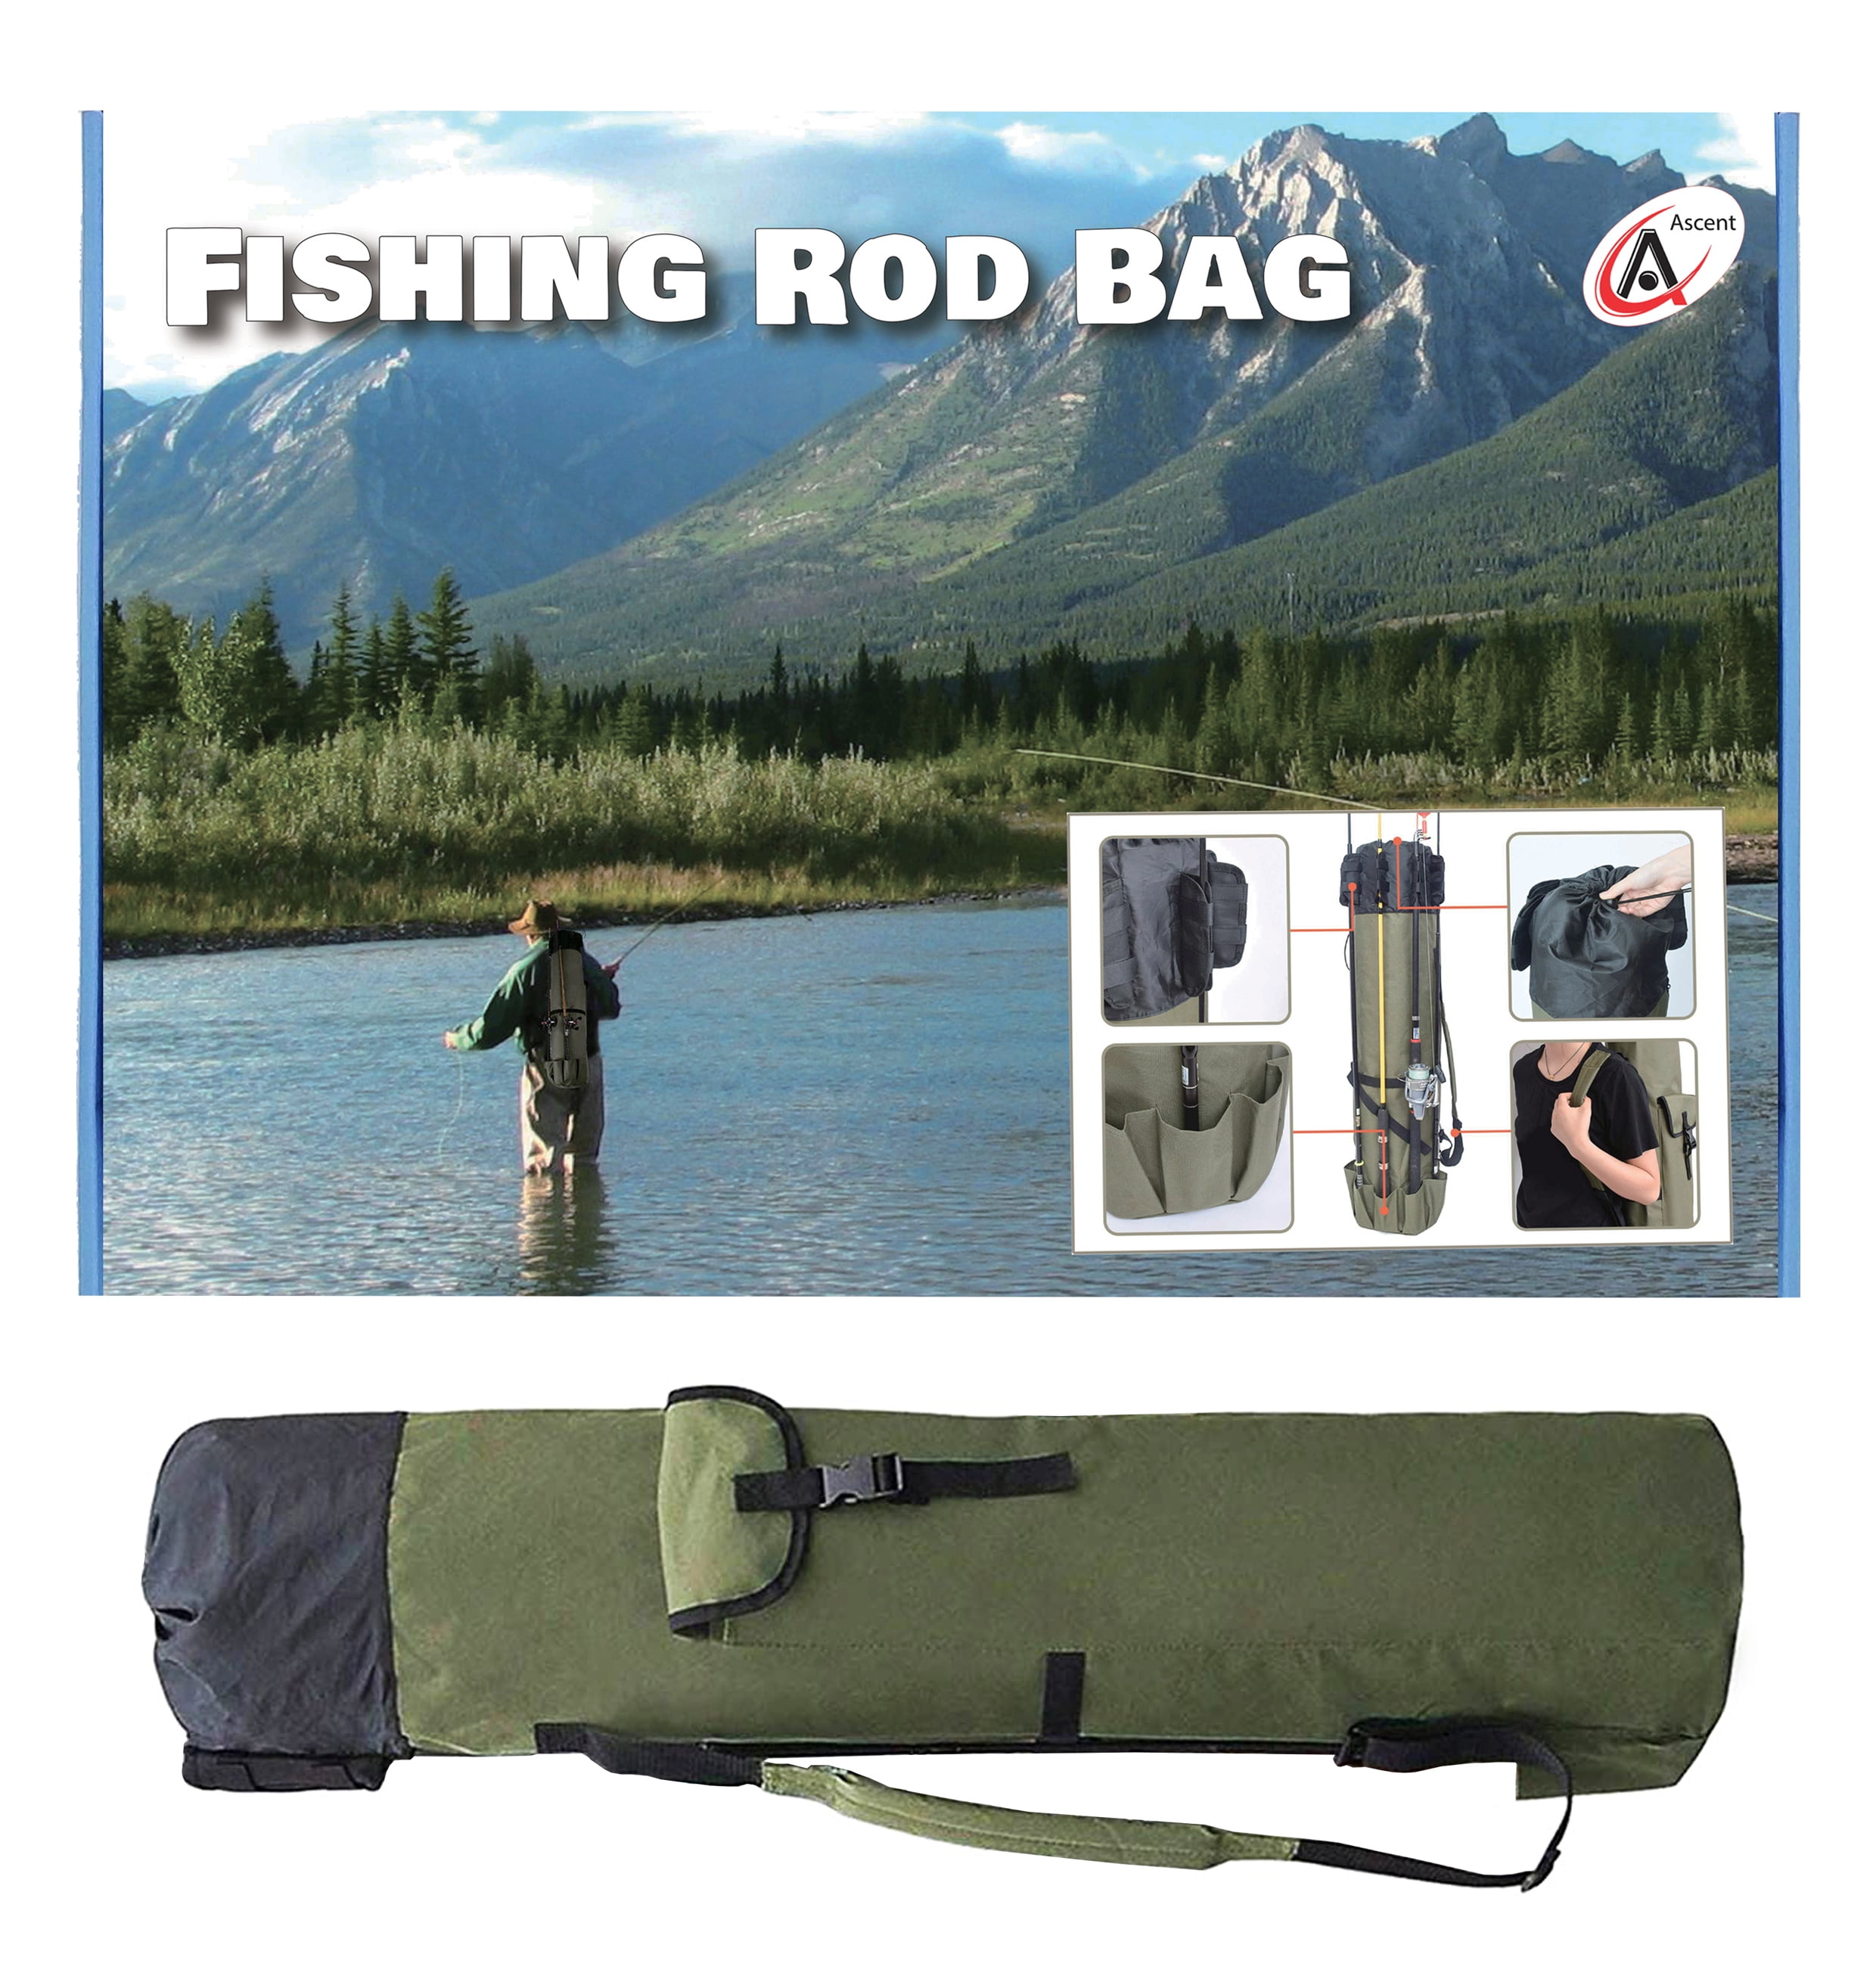 Ascent's Fisherman's Gift Rod Carrier Fishing Reel and Tackle Bag